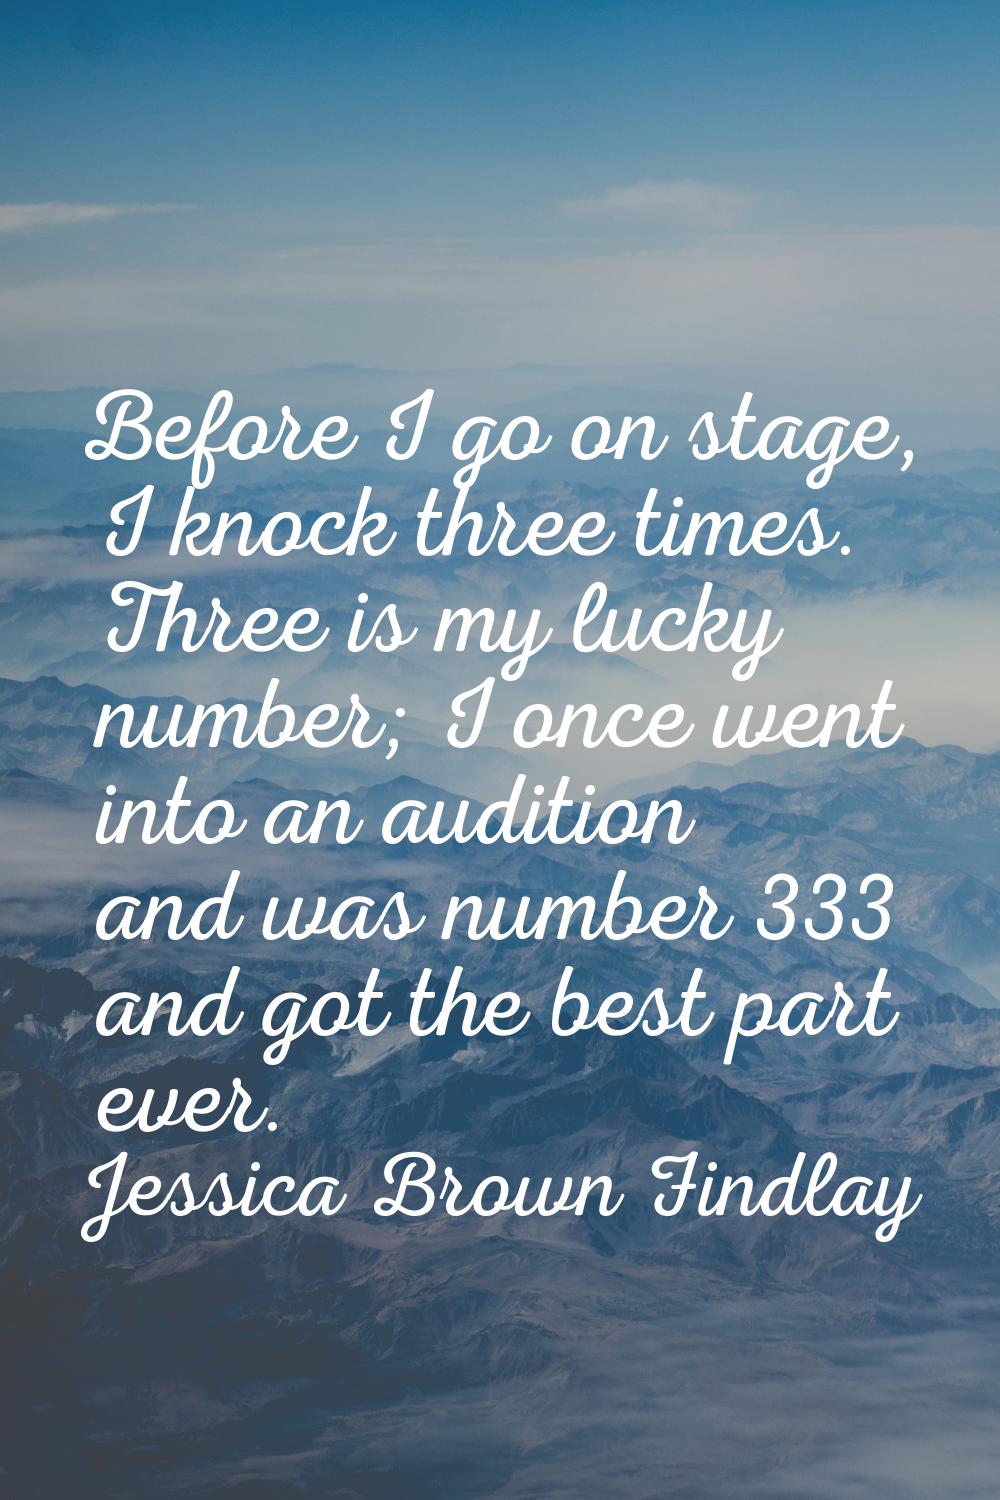 Before I go on stage, I knock three times. Three is my lucky number; I once went into an audition a